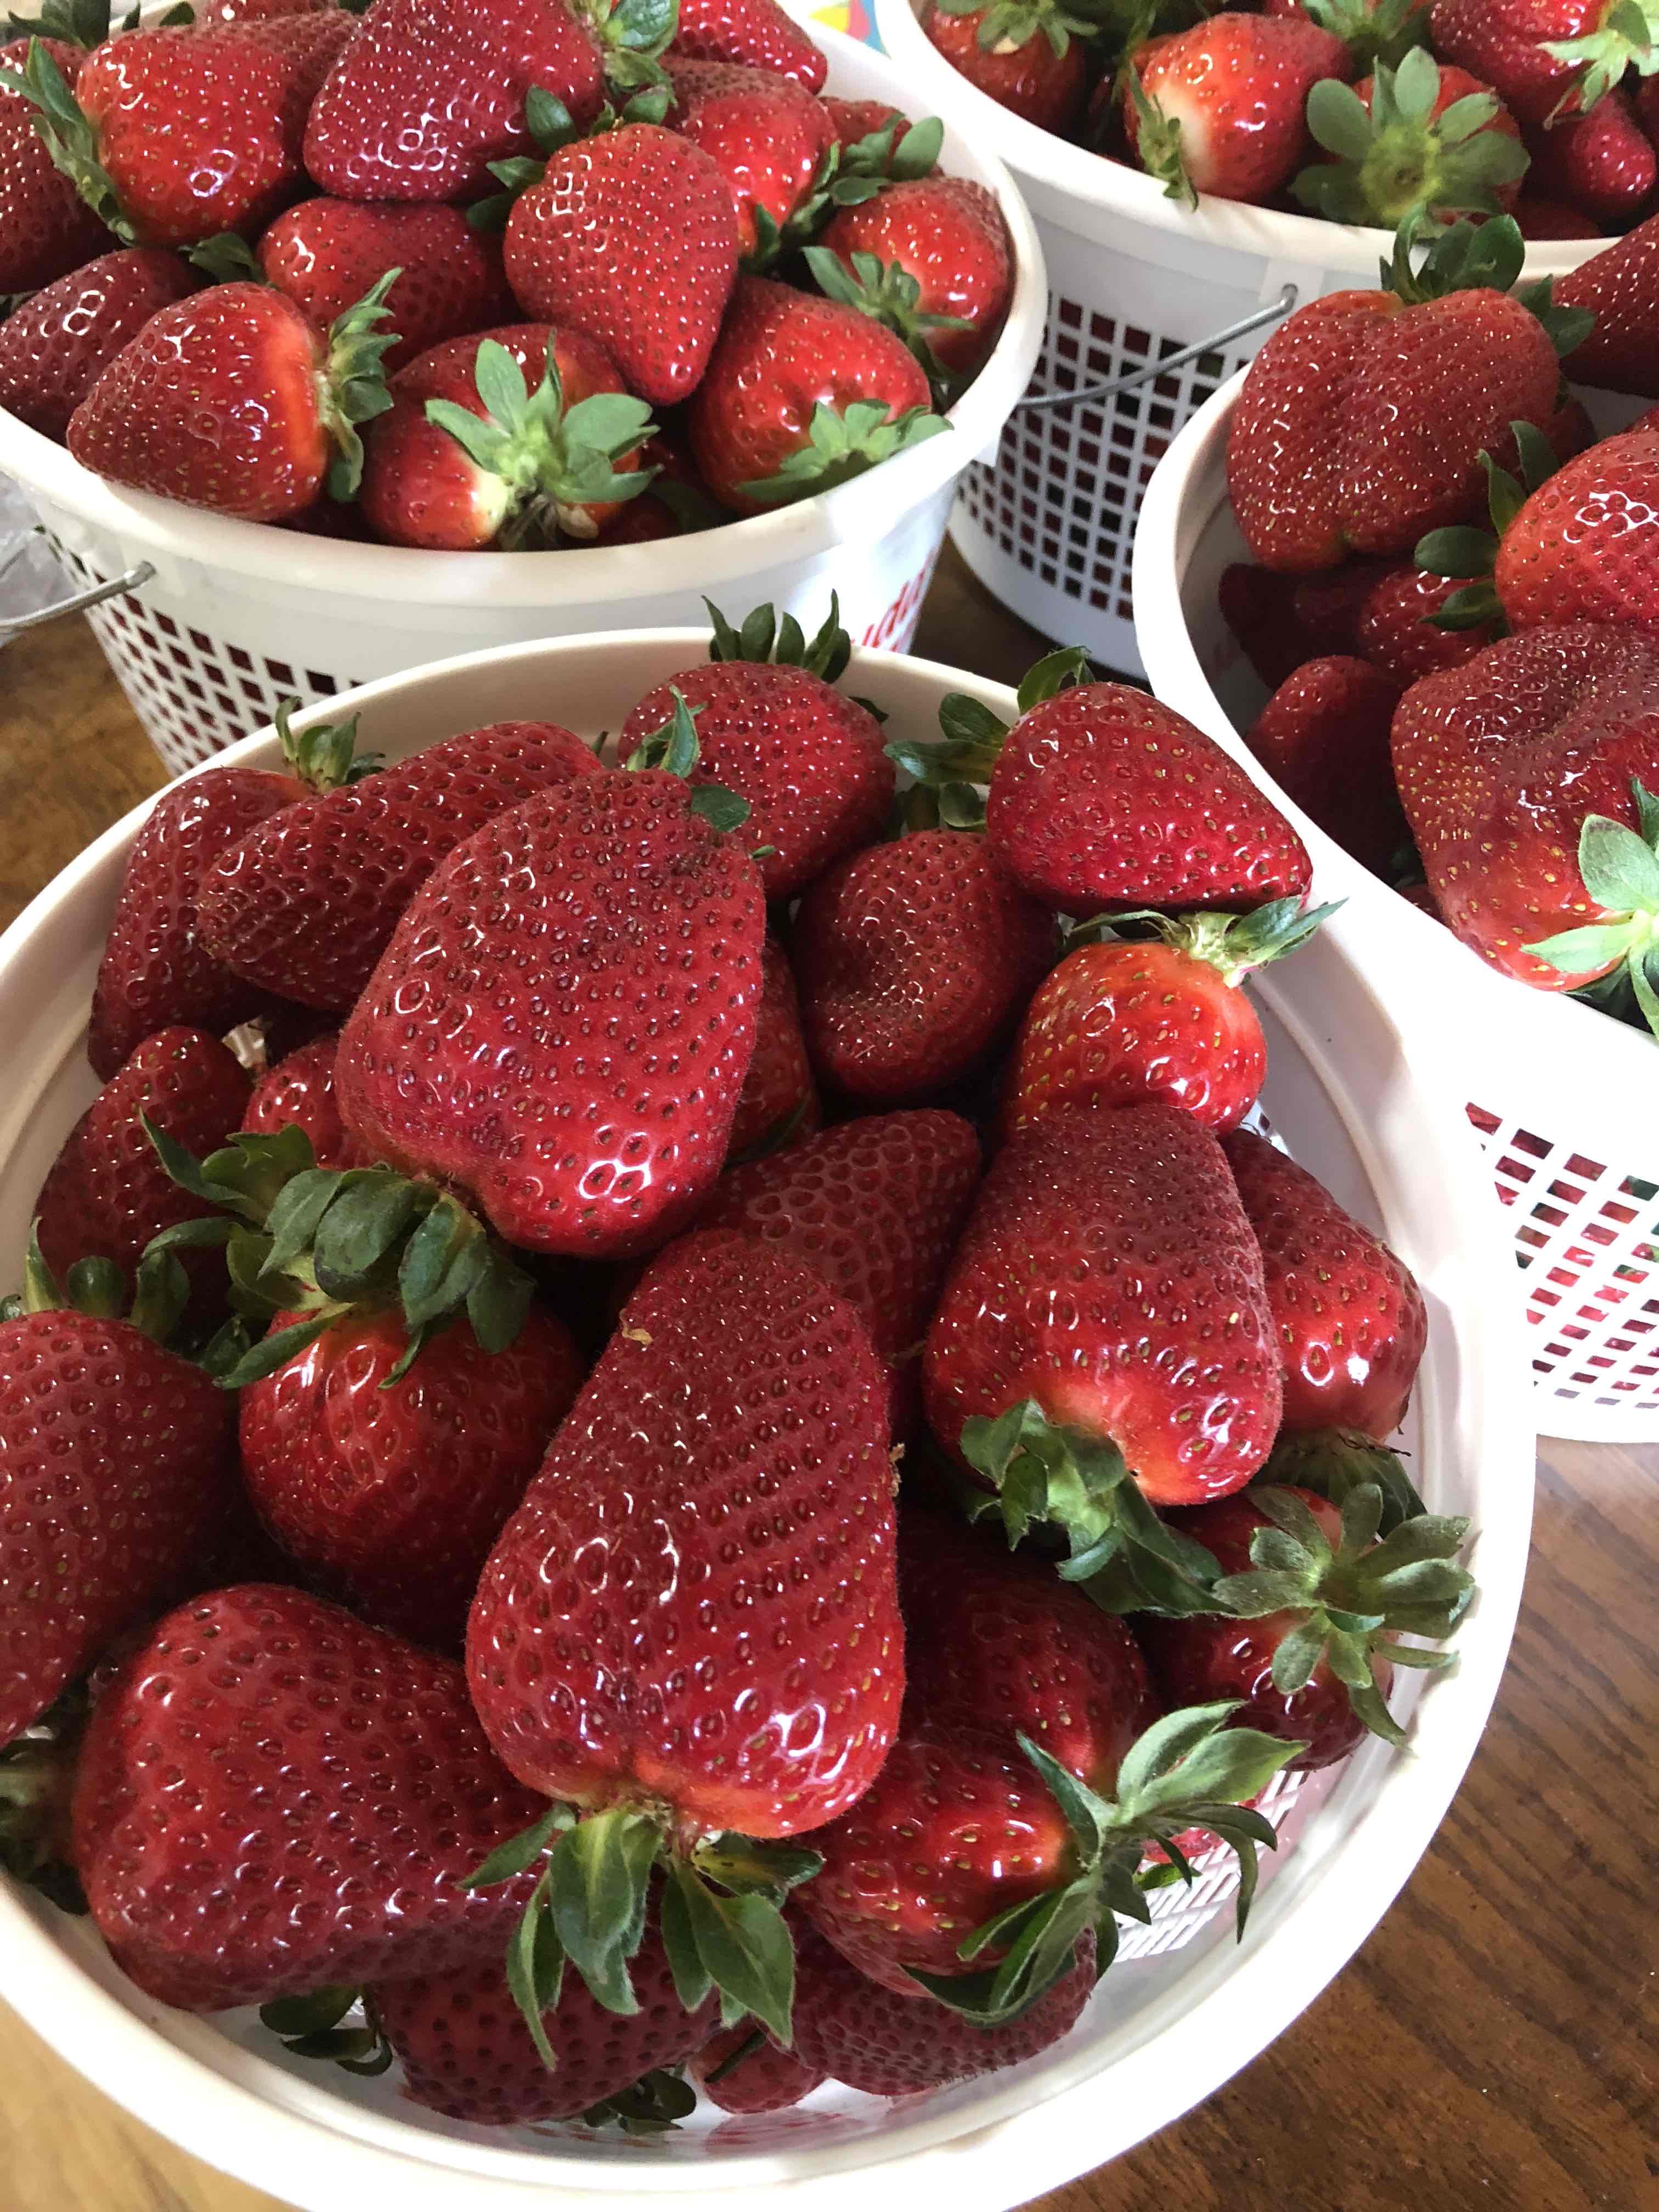 harvested strawberries in buckets